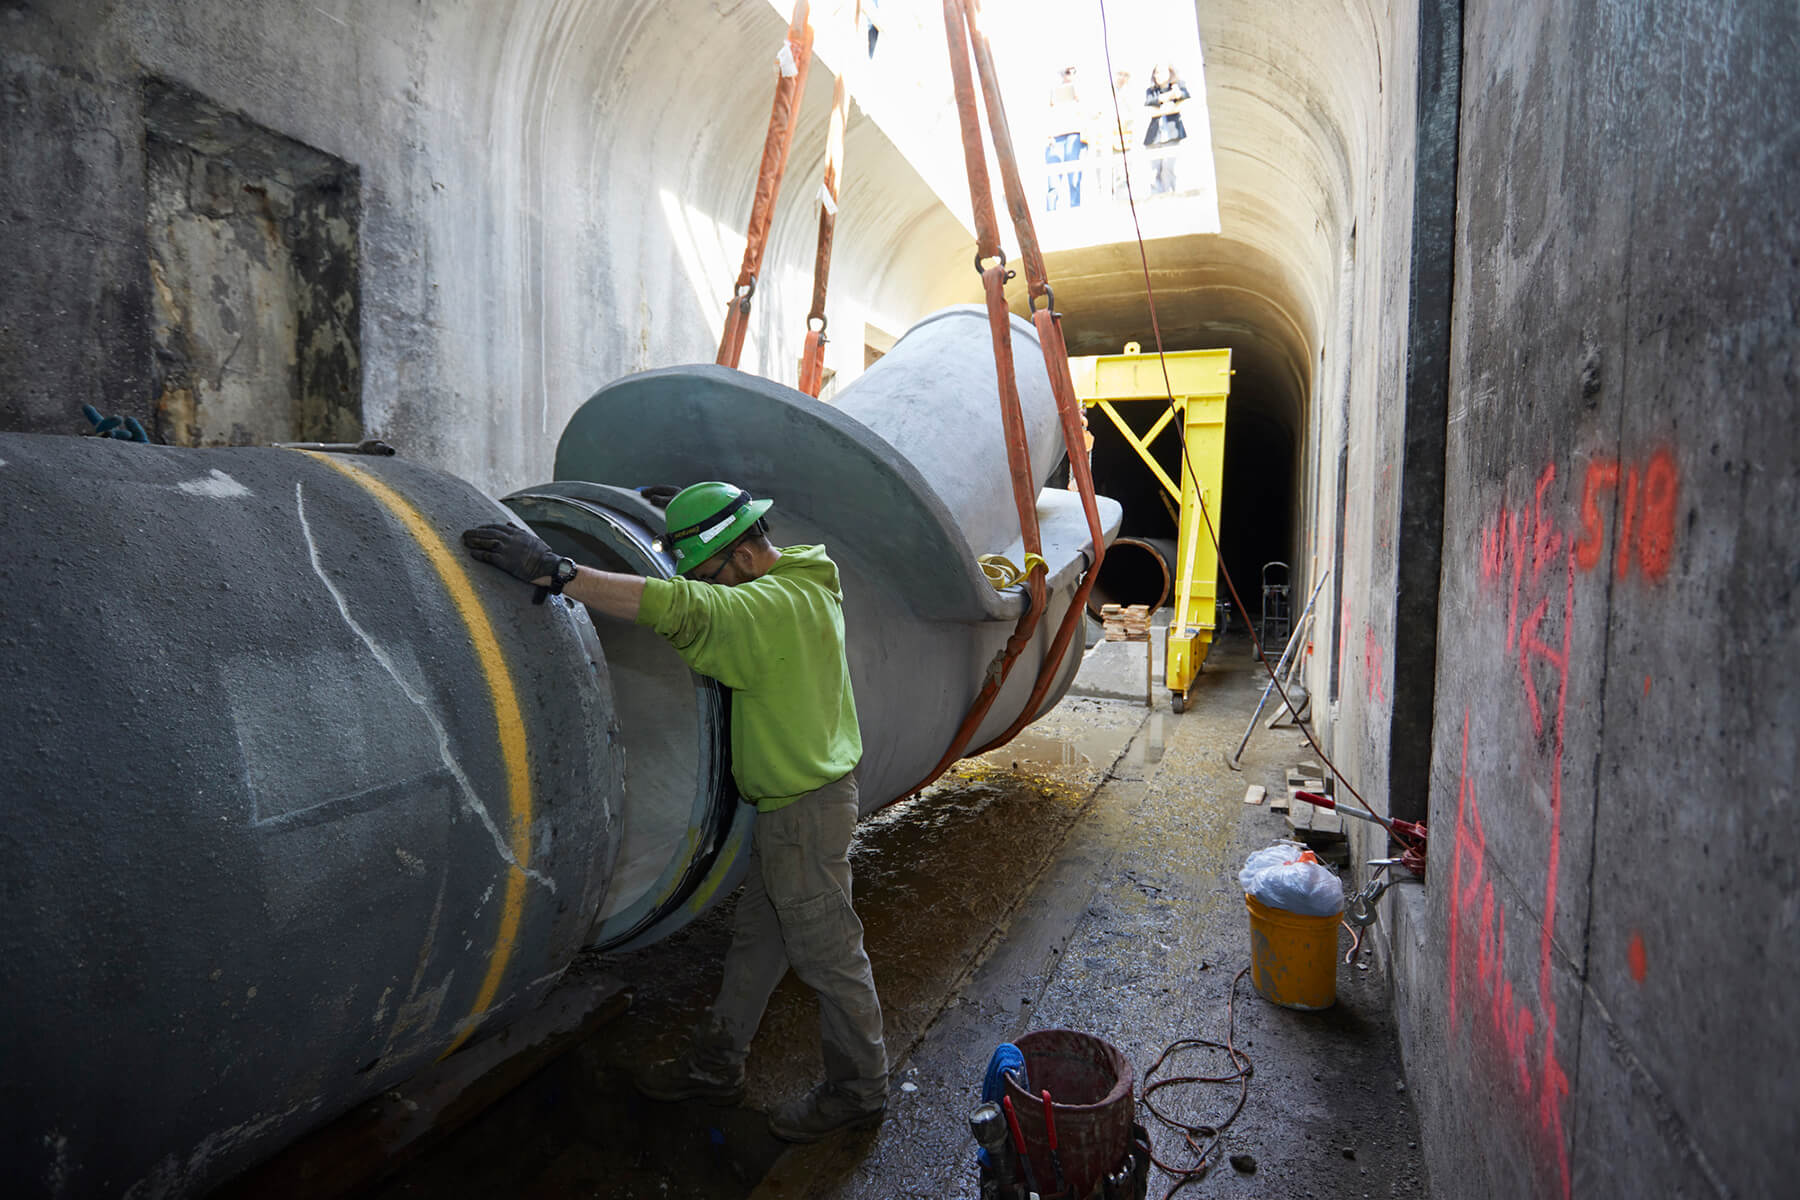 A worker steadies a pipe section along the route.